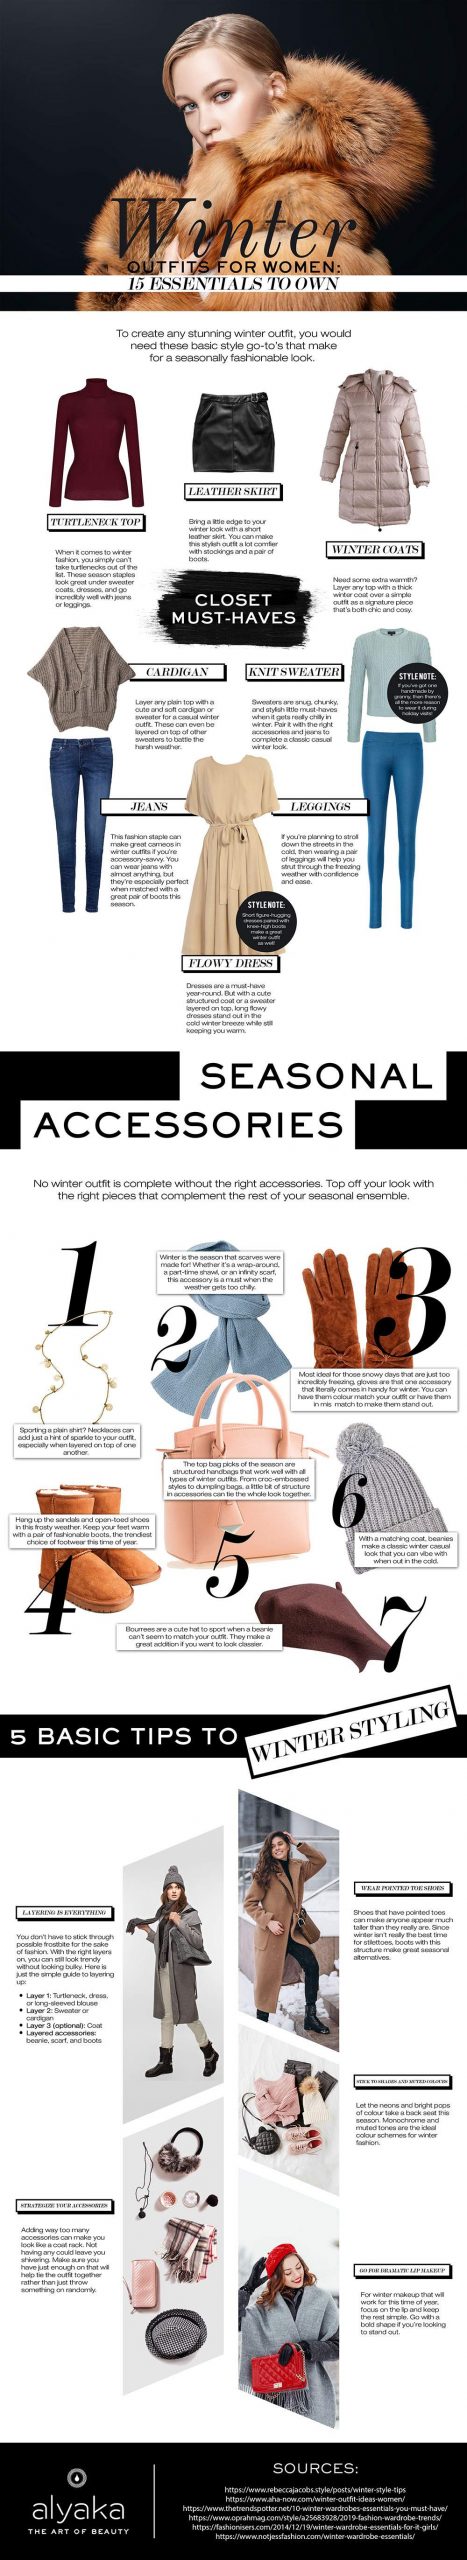 15 Fashion Essentials To Complete Your Winter Outfit